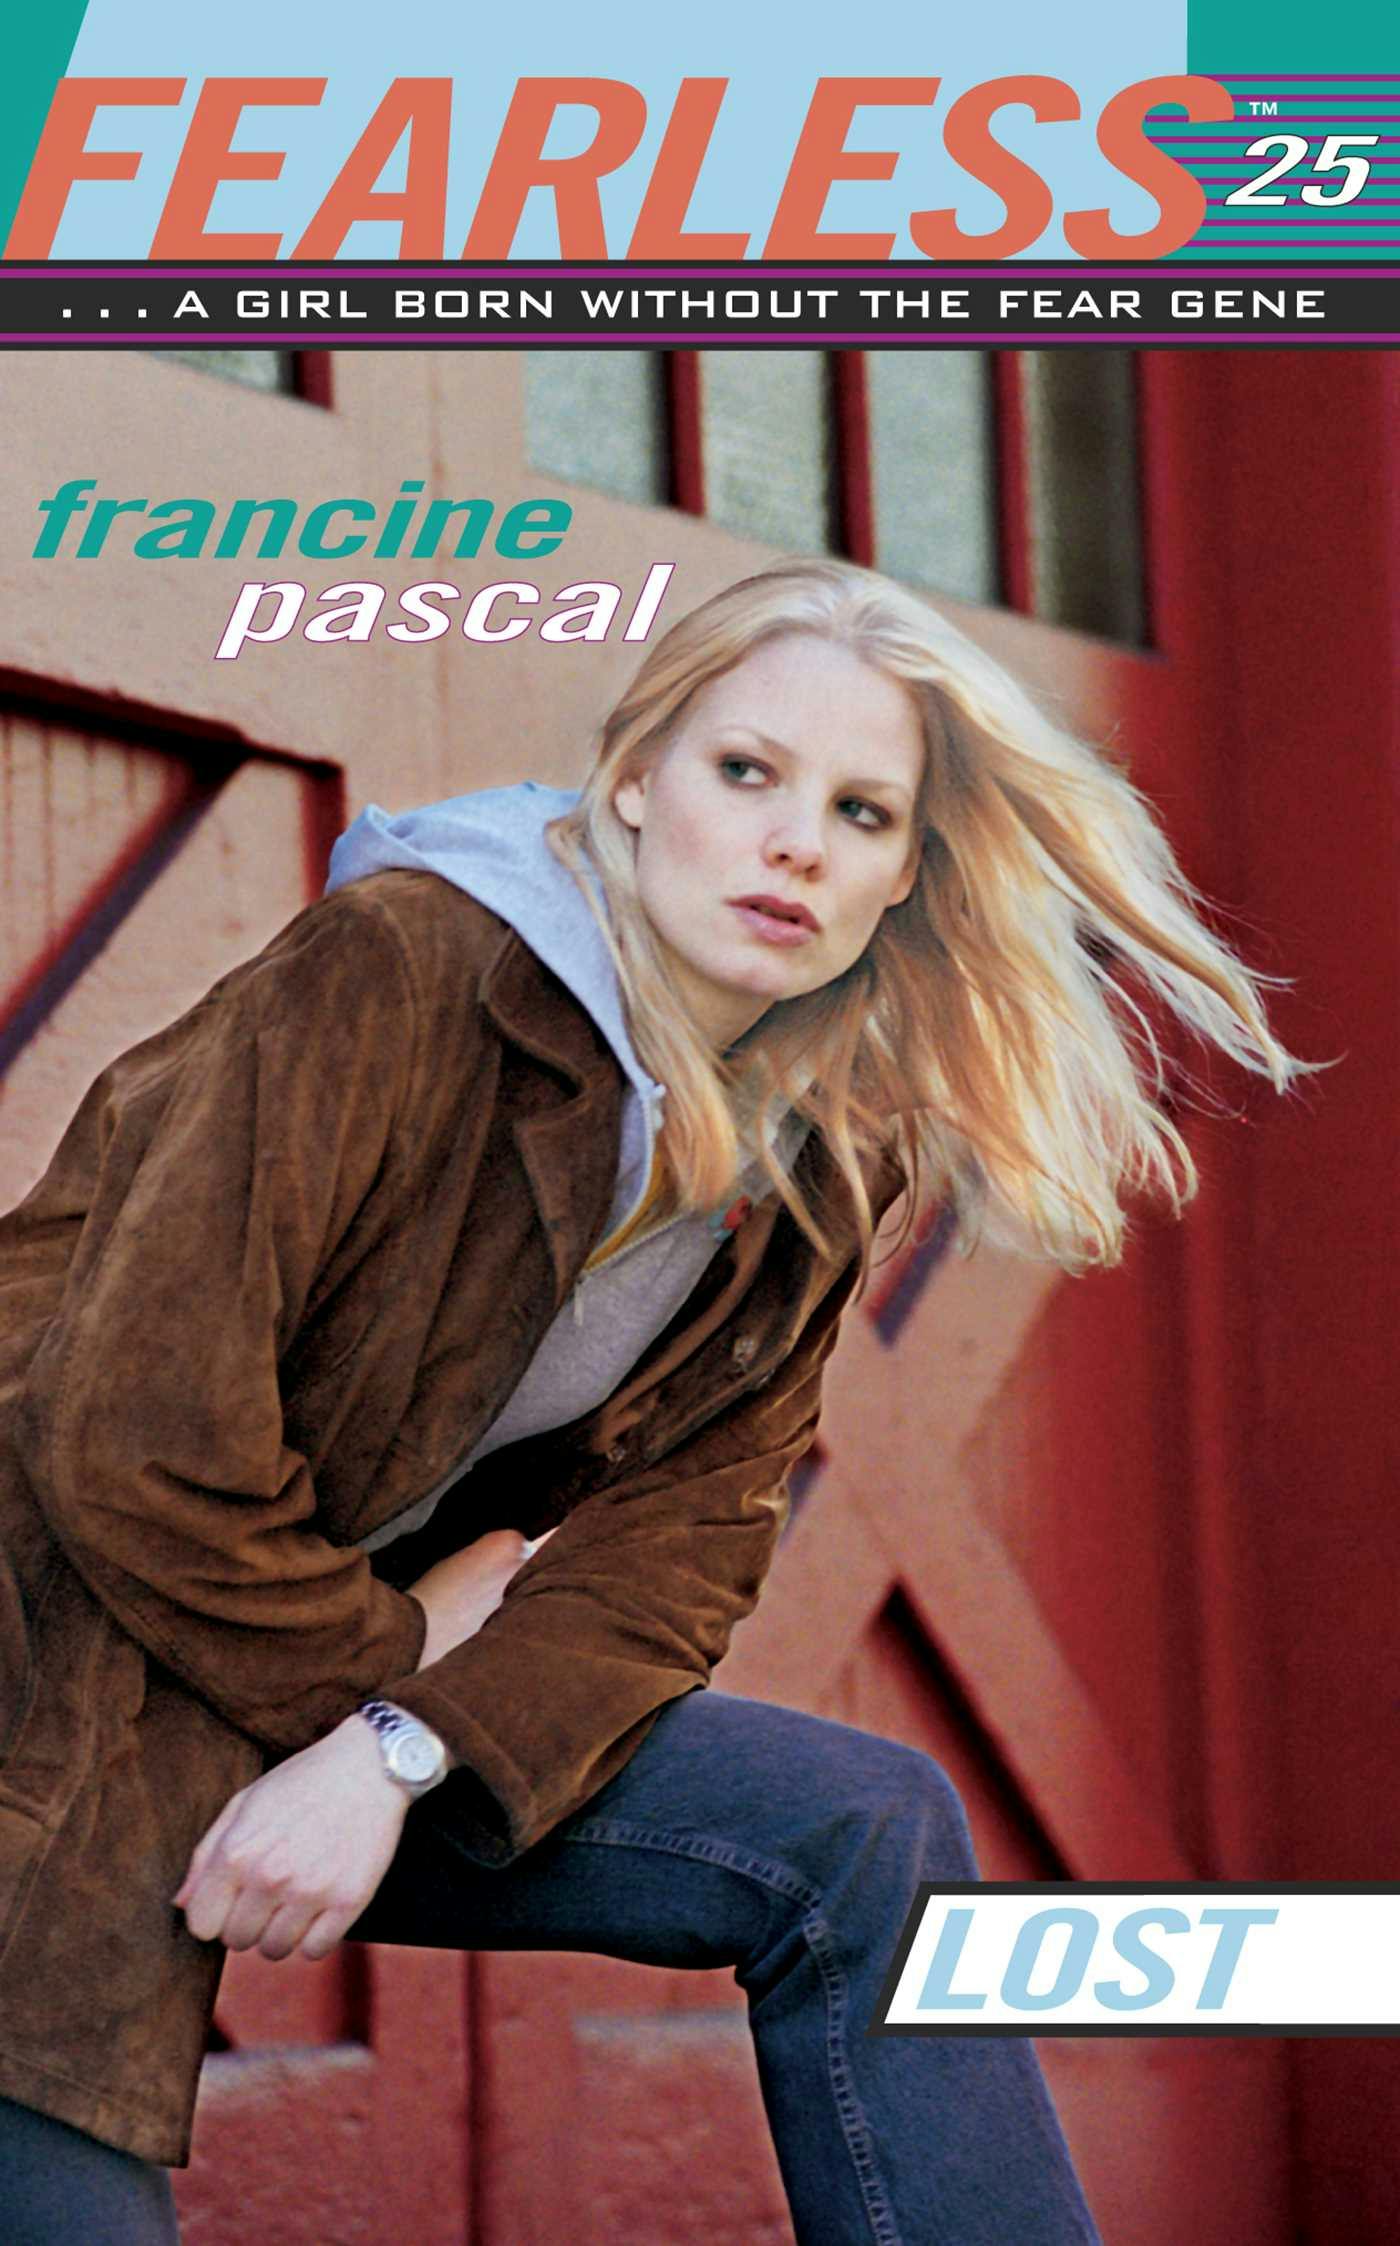 Lost - Francine Pascal